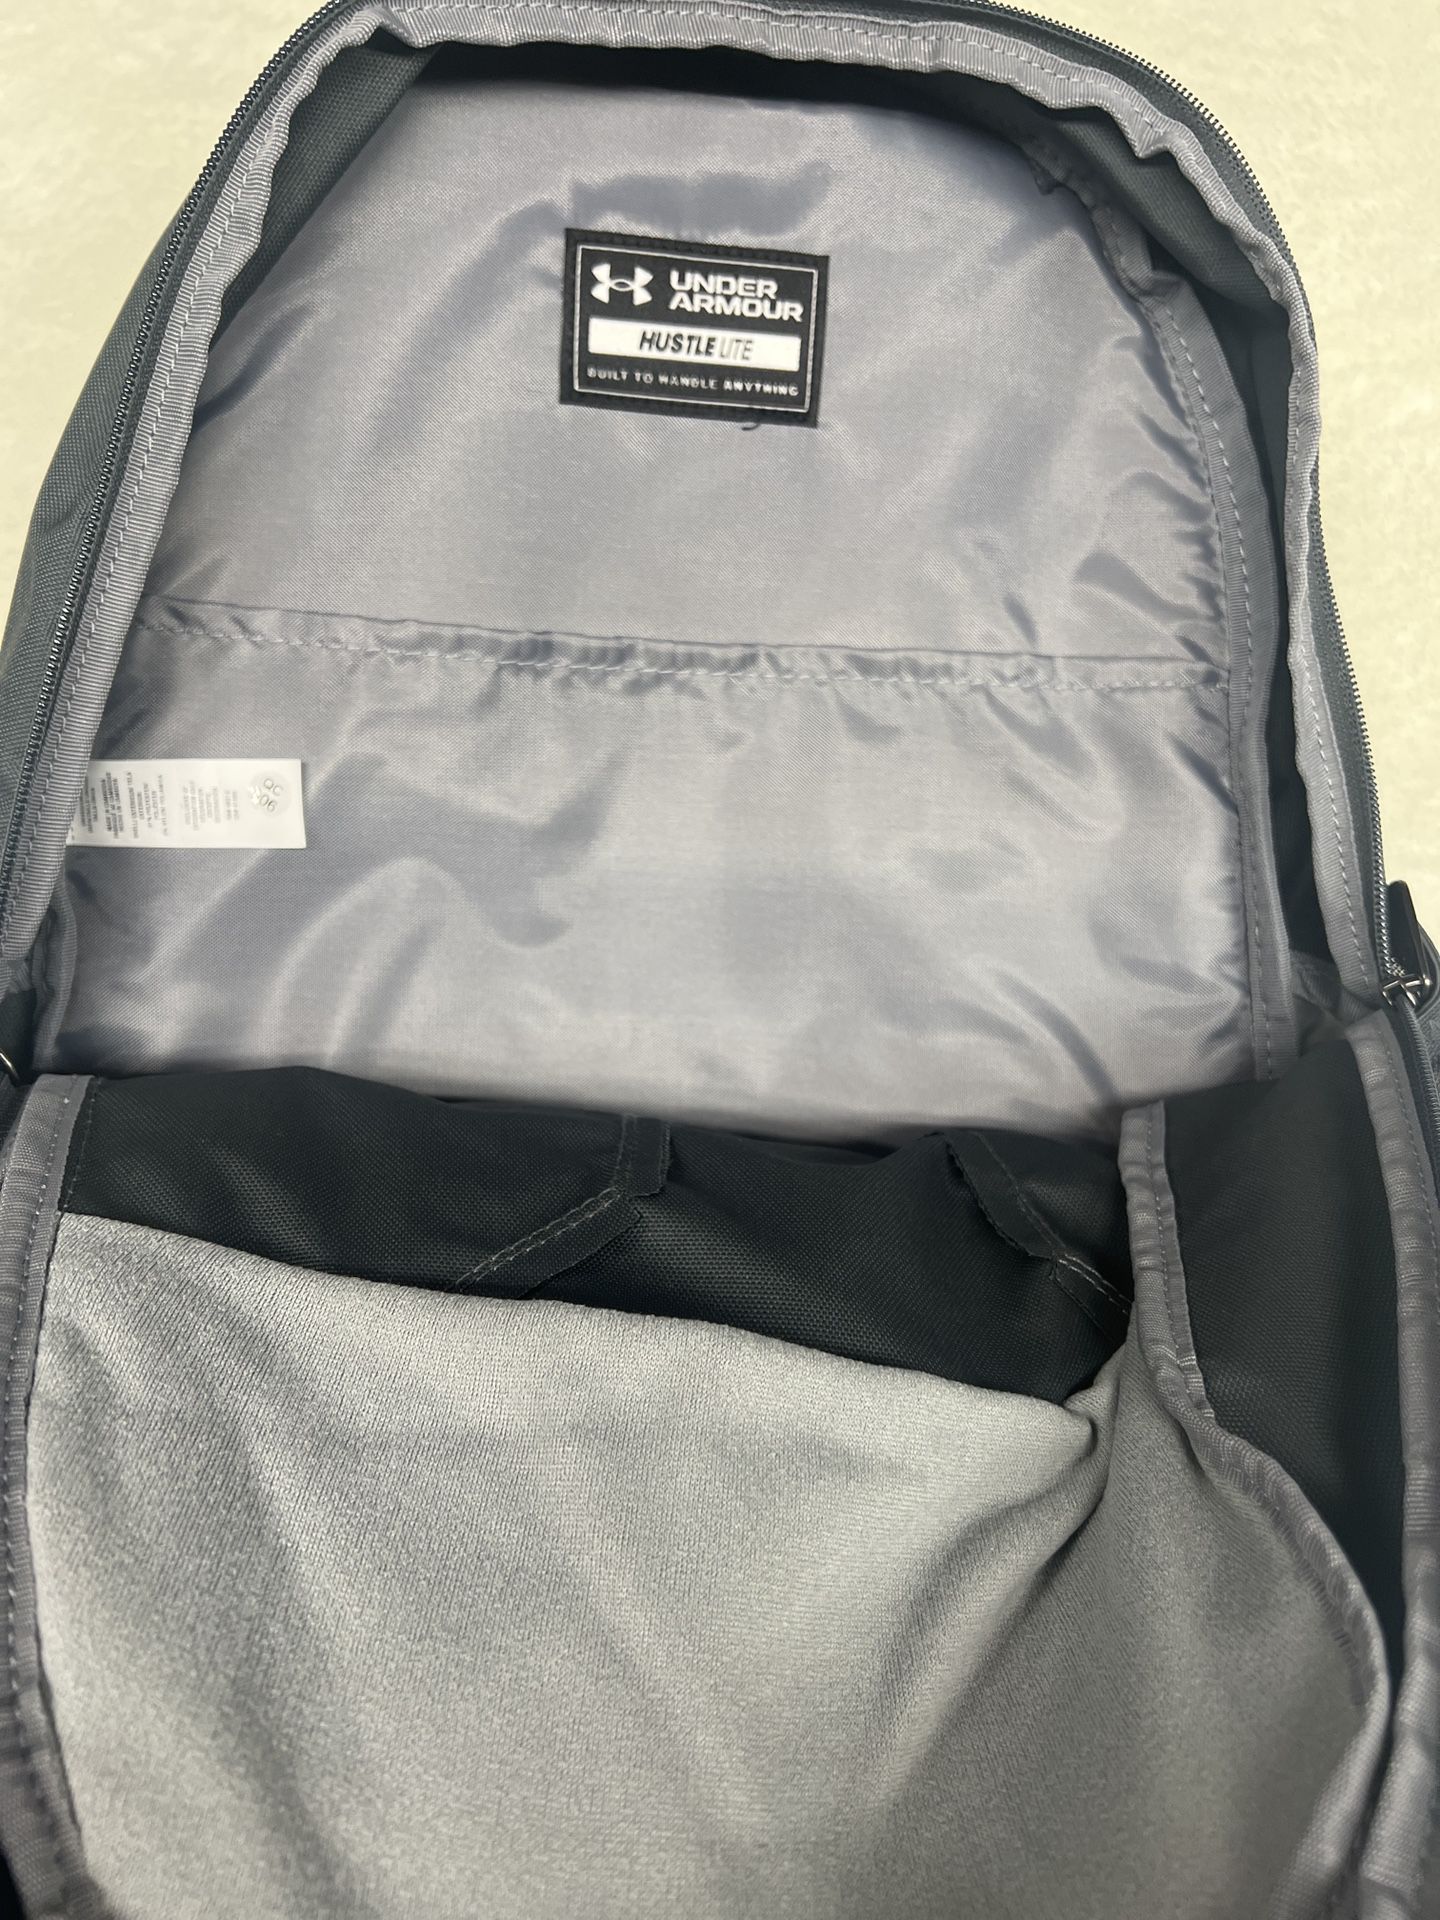 NEW Under Armour Storm Backpack!  Color Is Gray And Silver And Is Brand New With Tags!